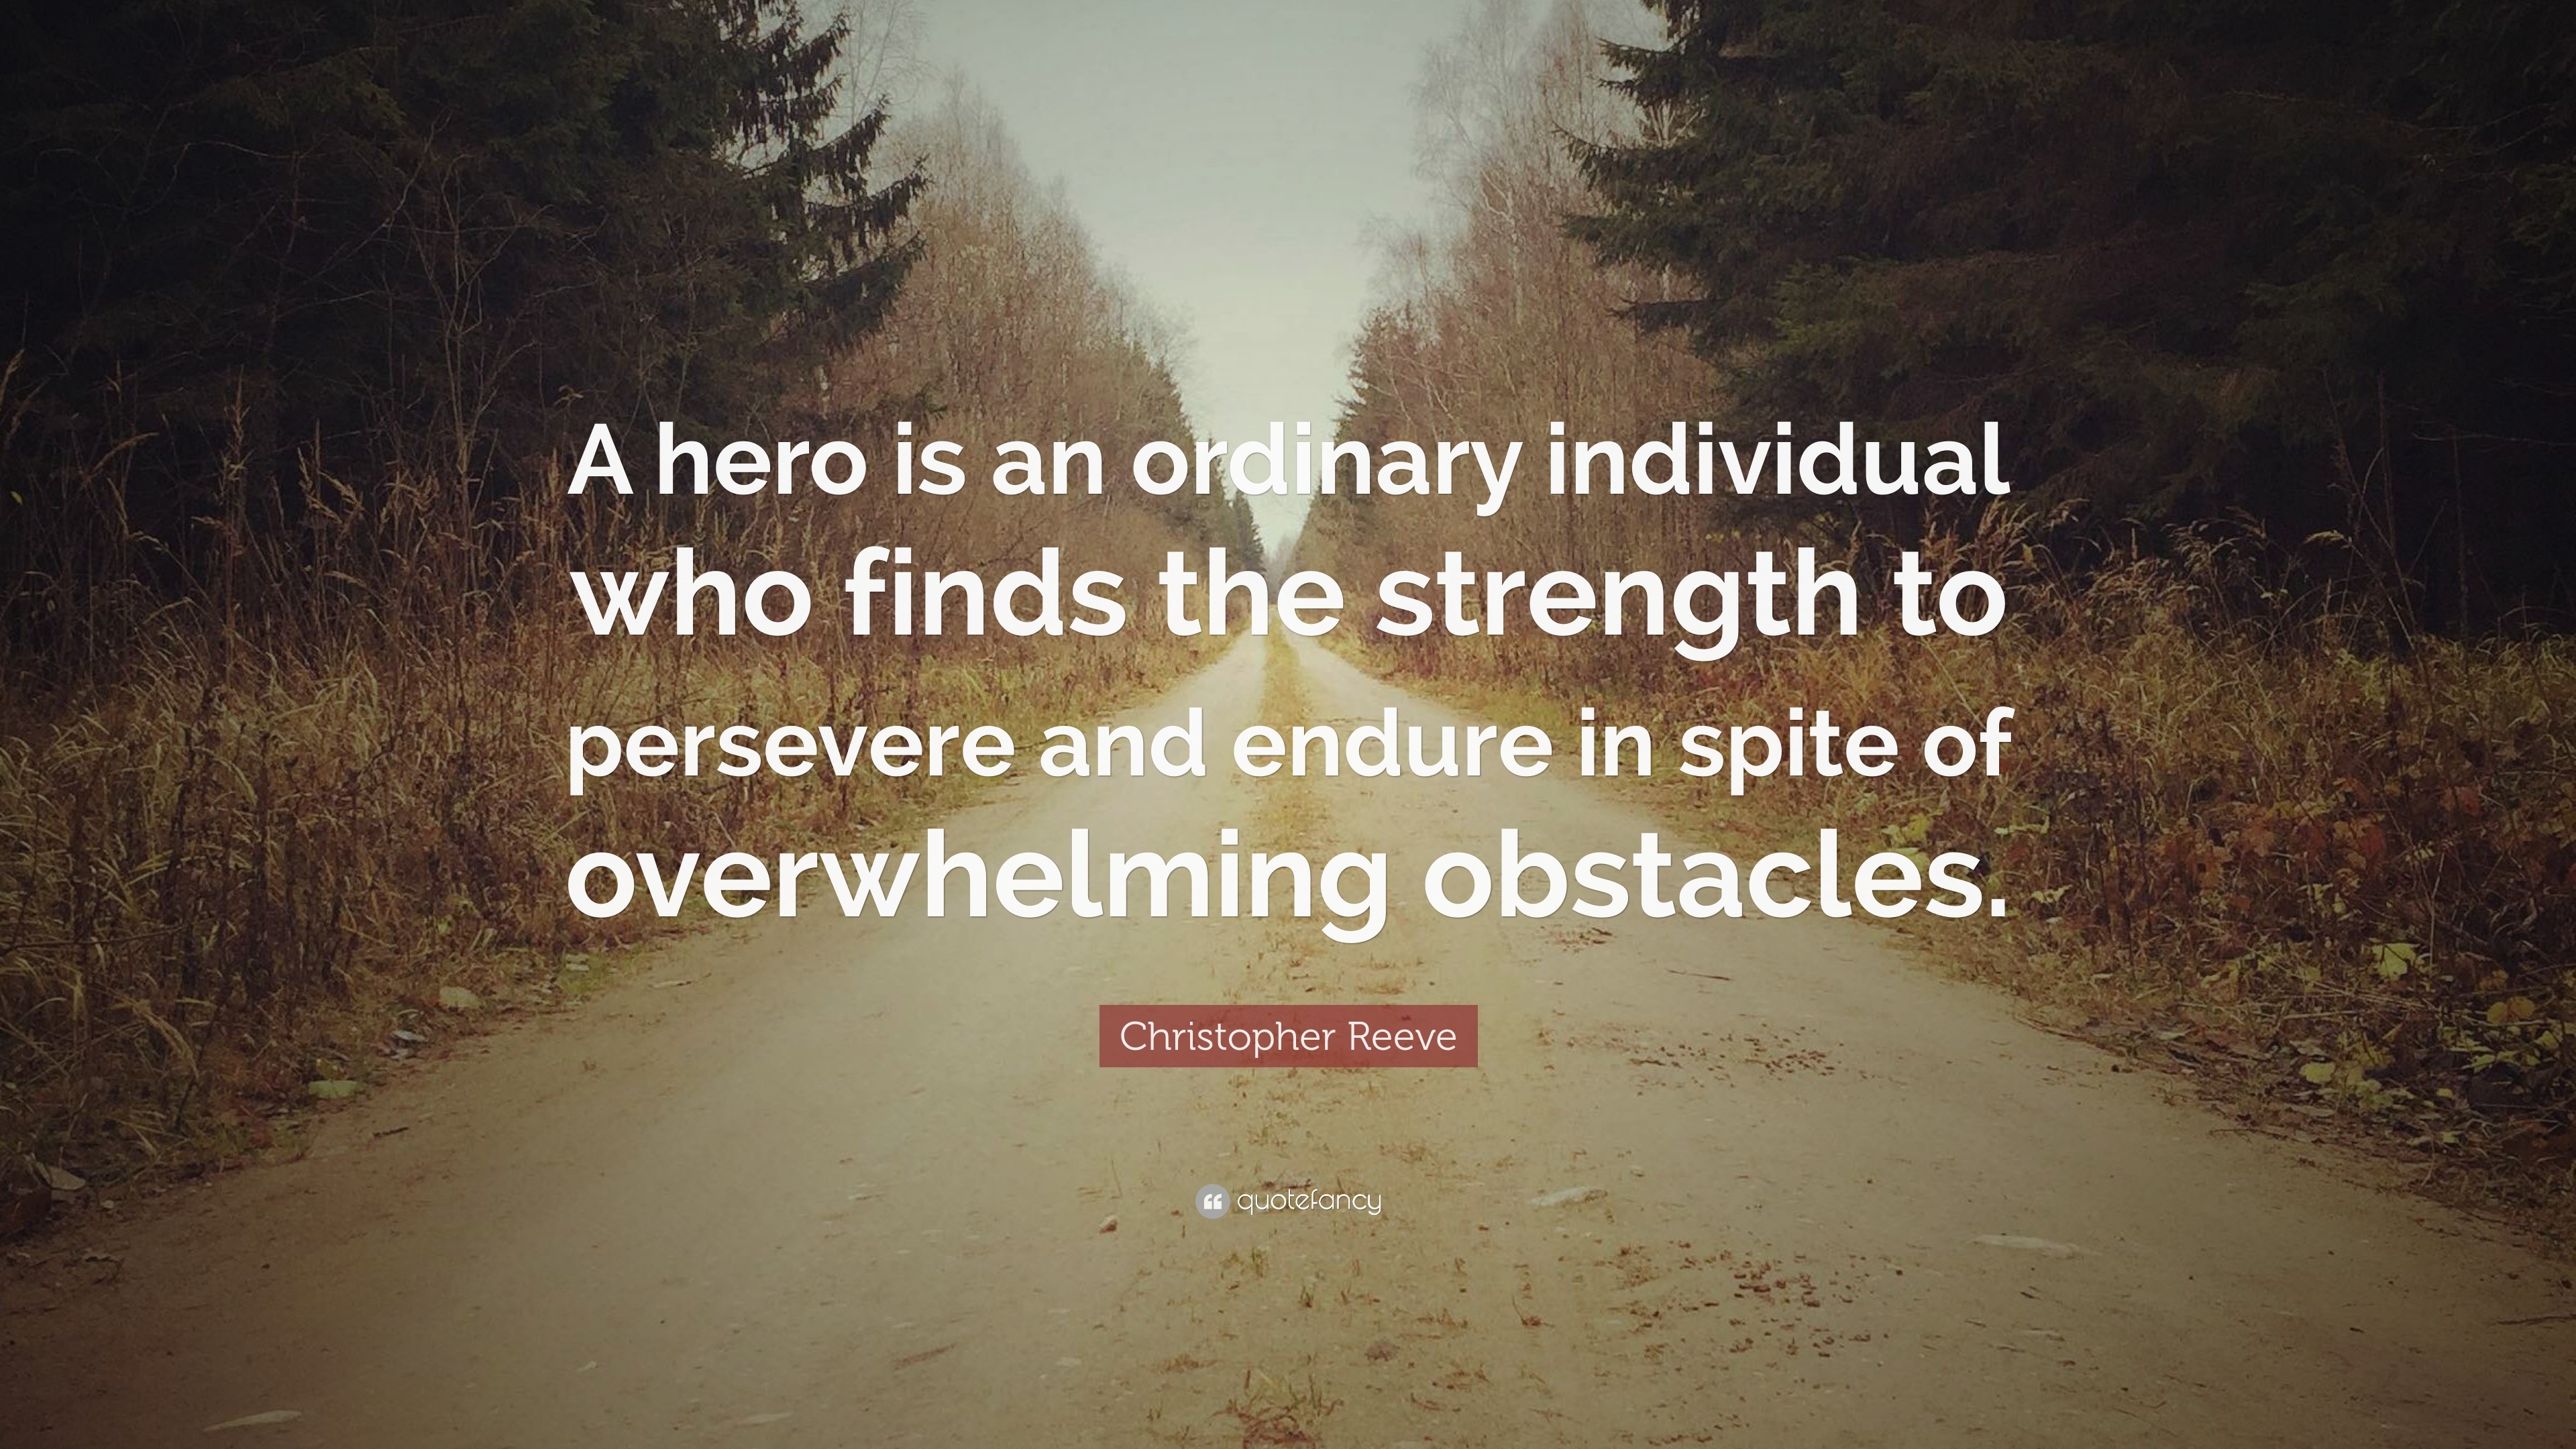 Christopher Reeve Quote: “A hero is an ordinary individual who finds